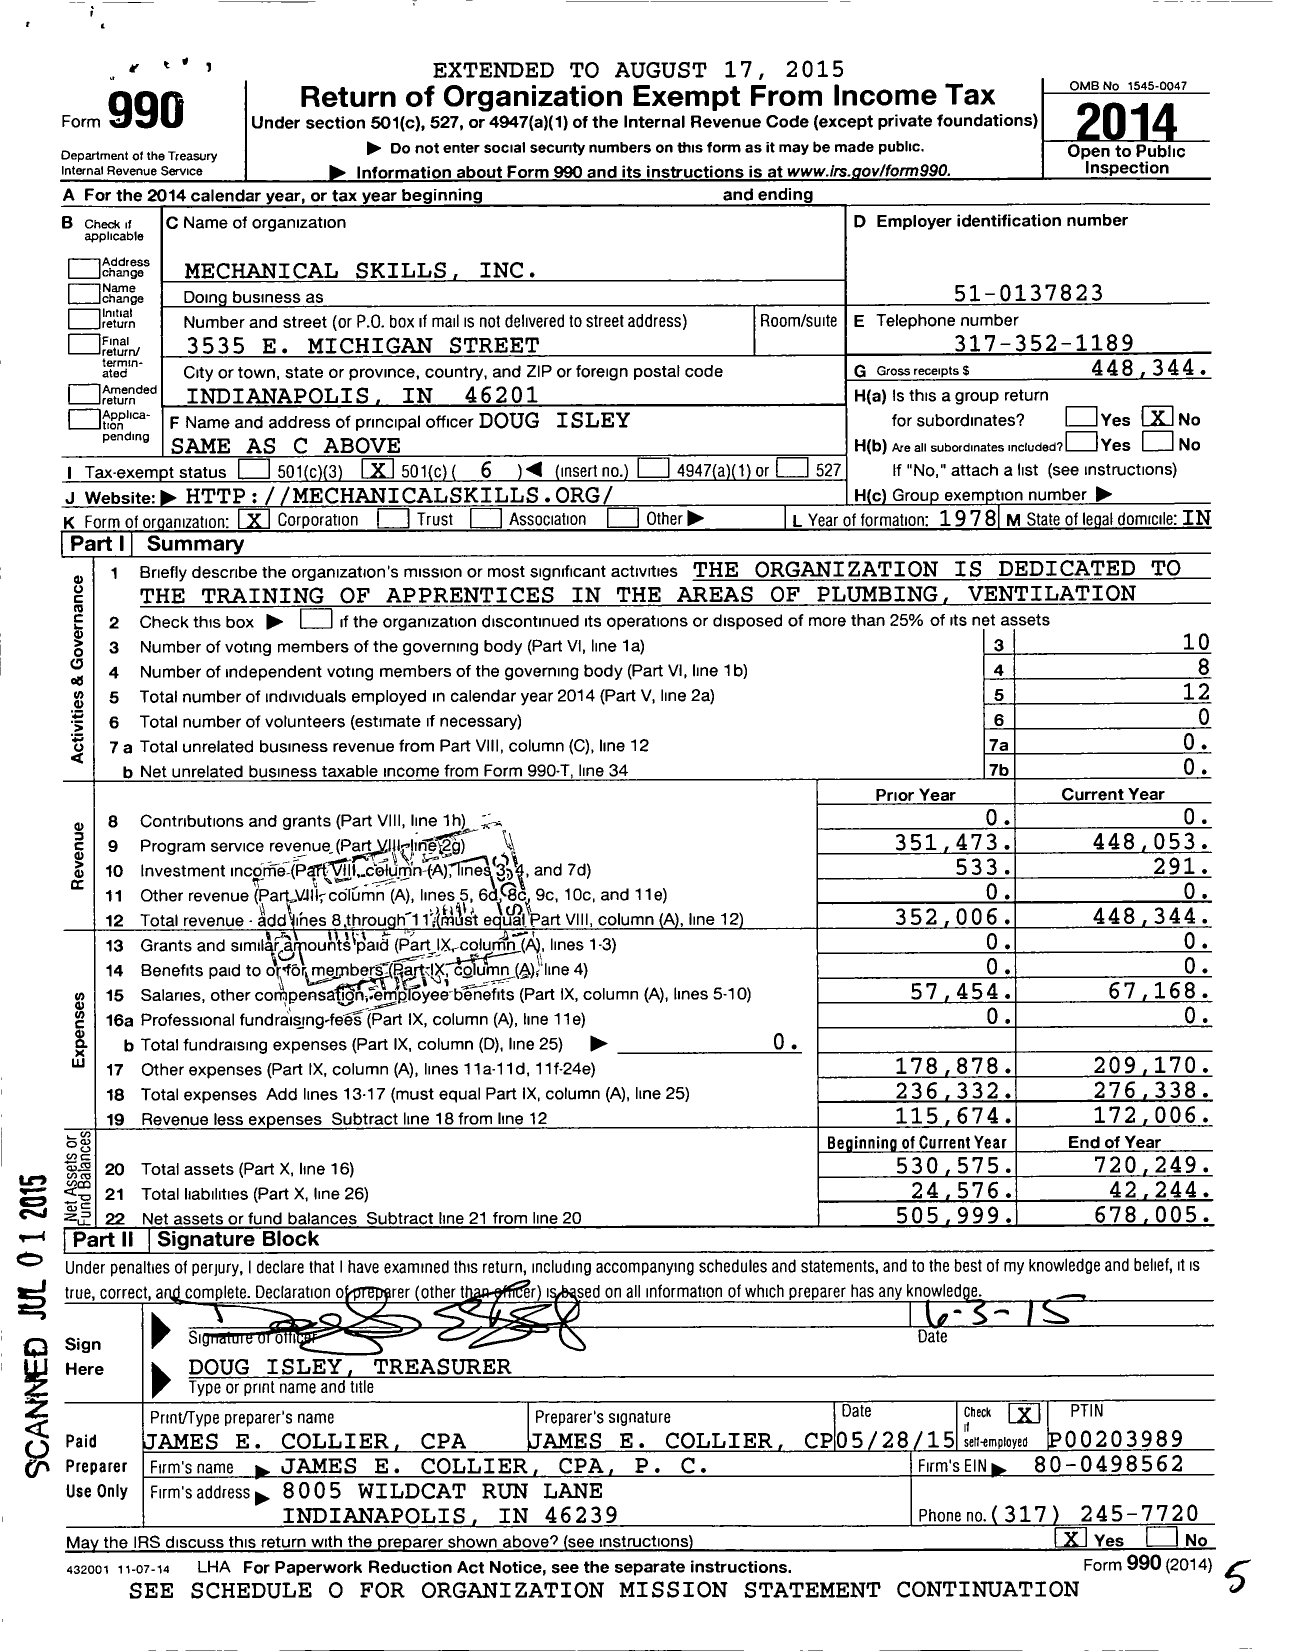 Image of first page of 2014 Form 990O for Mechanical Skills